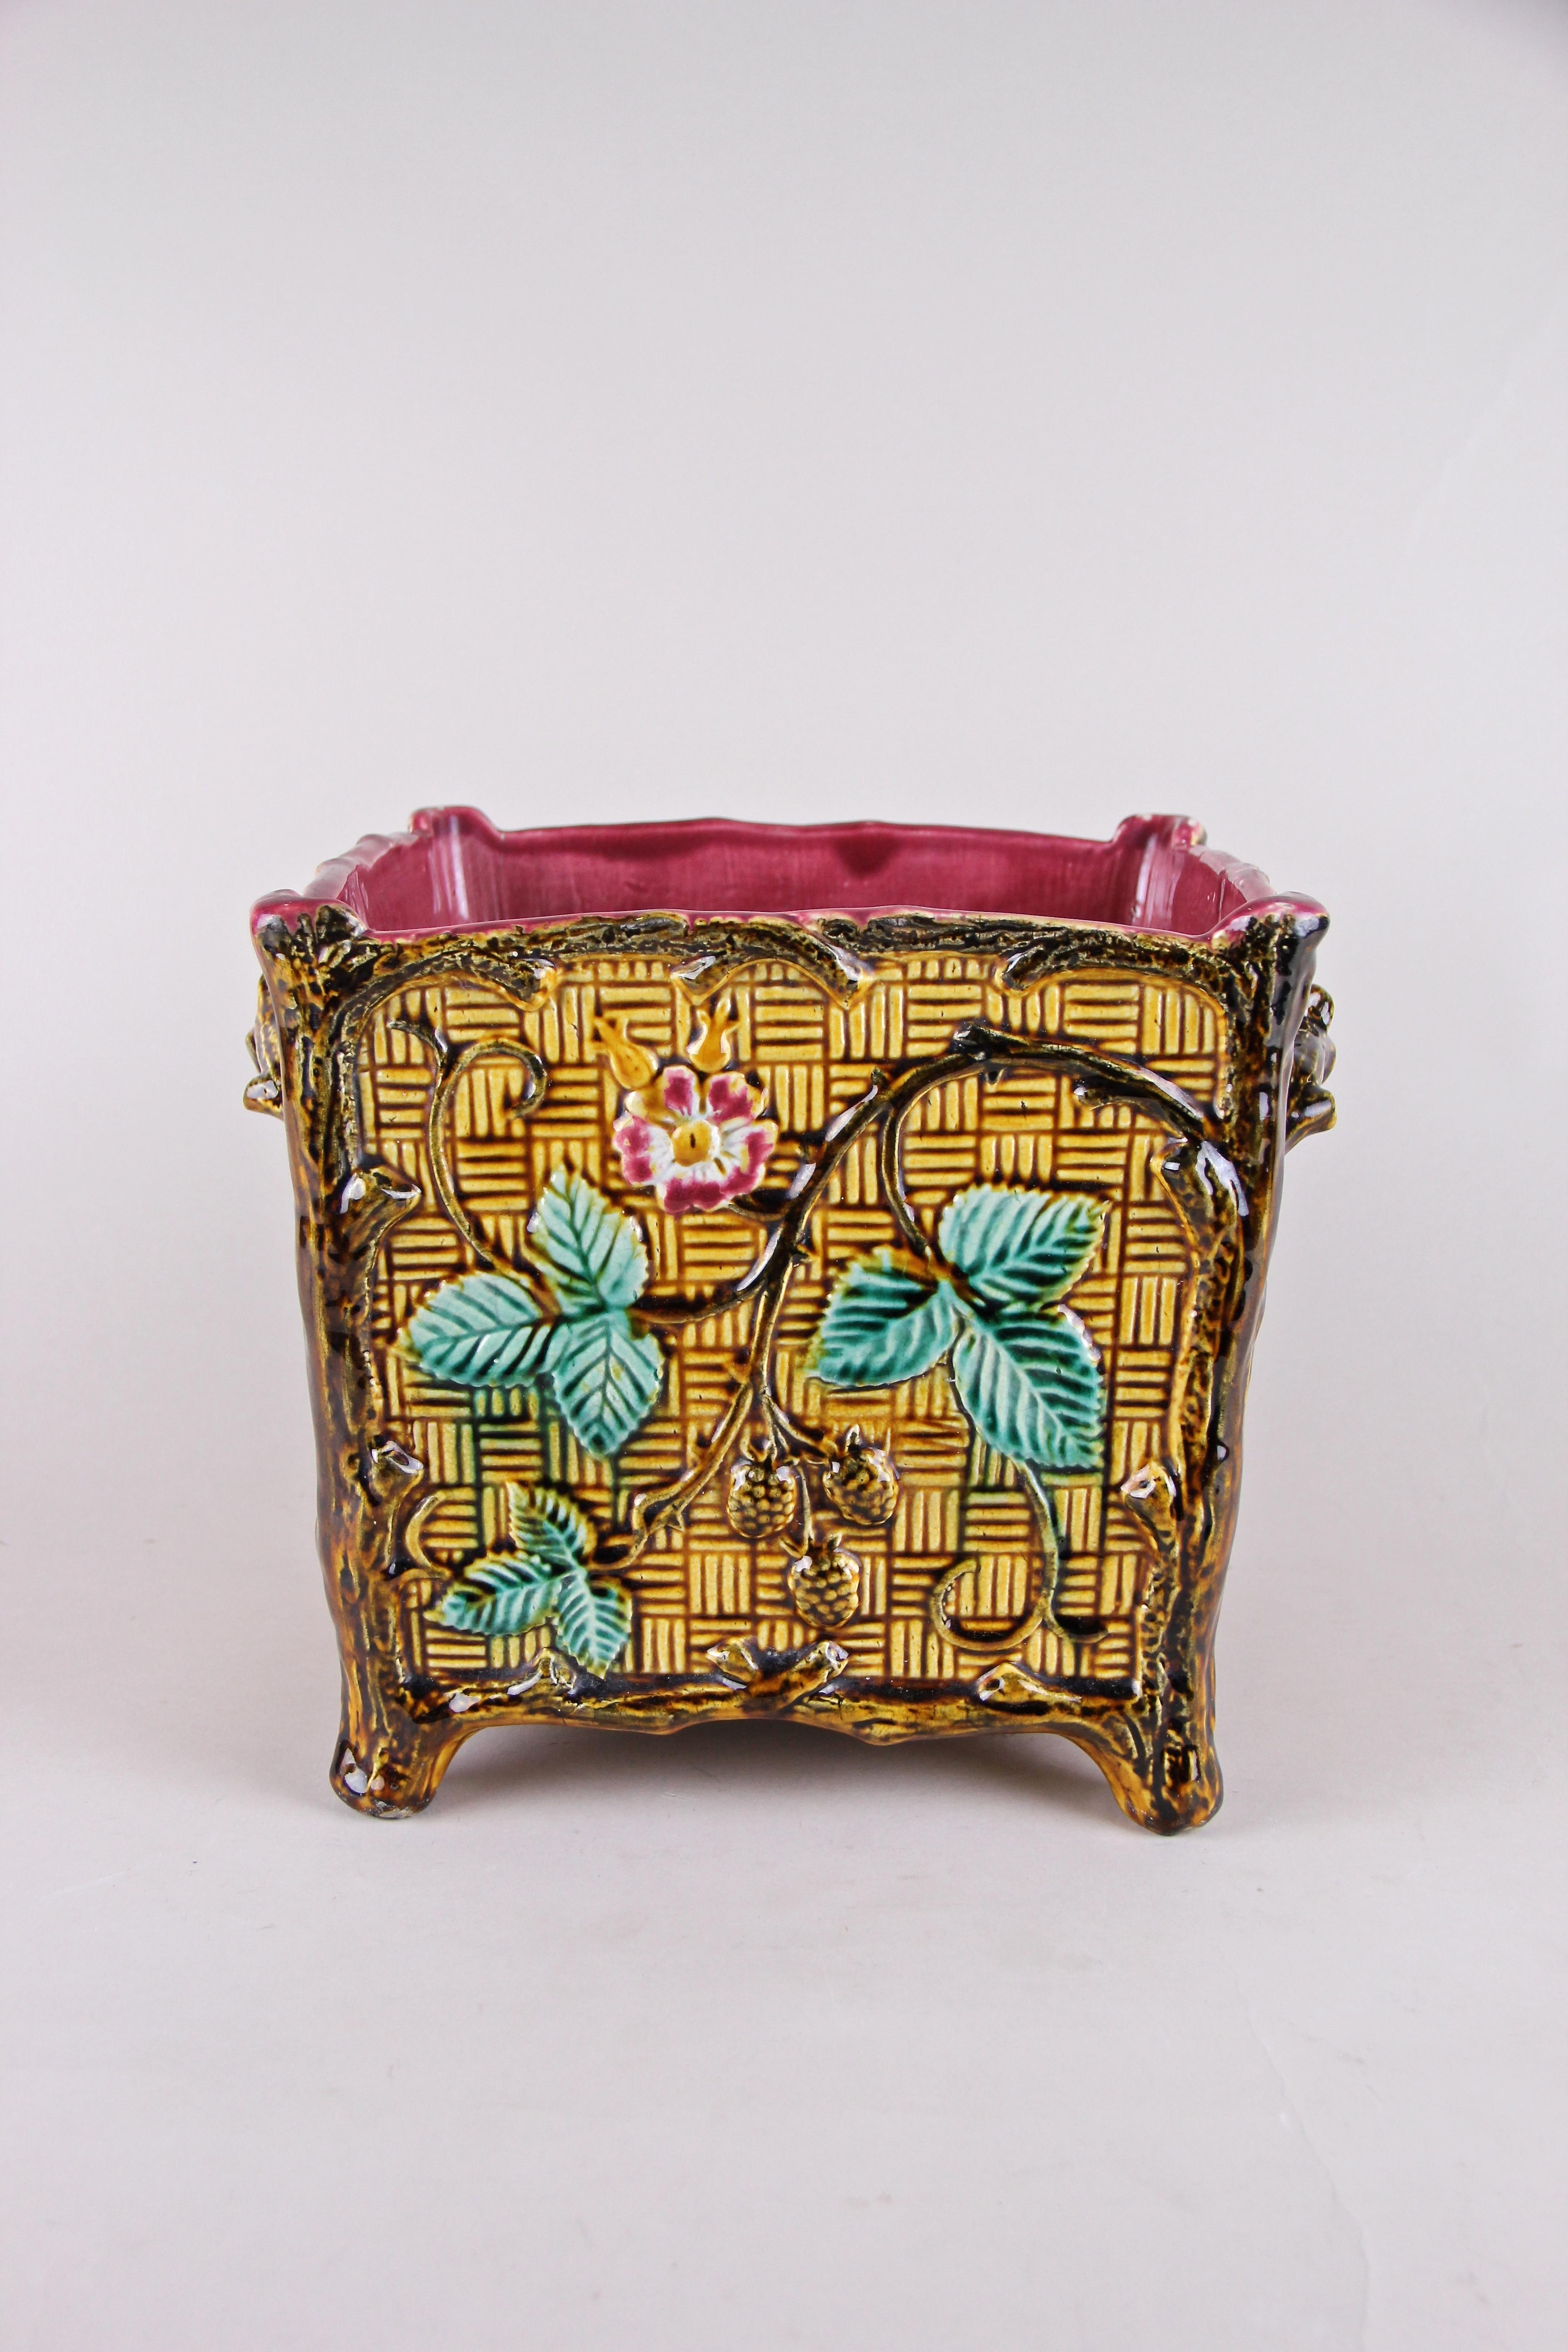 Unusual Majolica cachepot or planter out of France from the beginning of the 20th. This exceptional planter was made out of fine Majolica in a very unique style: namely in the design of a woven basket. The quadratic shaped cachepot is framed by tree